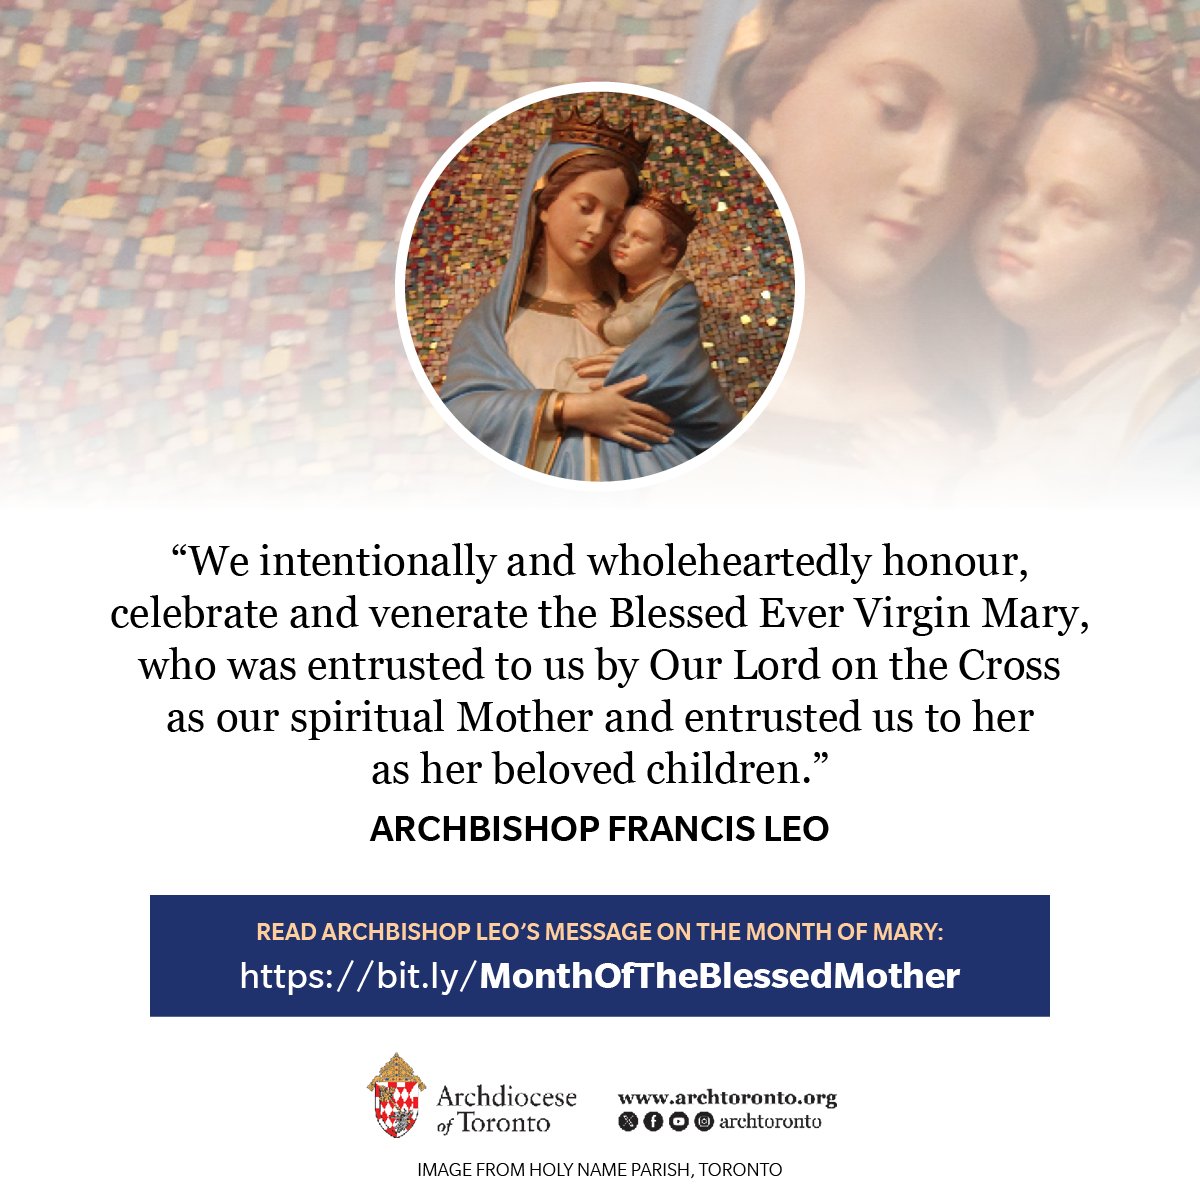 'We intentionally and wholeheartedly honour, celebrate and venerate the Blessed Ever Virgin Mary, who was entrusted to us by Our Lord on the Cross as our spiritual Mother and entrusted us to her as her beloved children.' bit.ly/MonthOfTheBles… #catholicTO